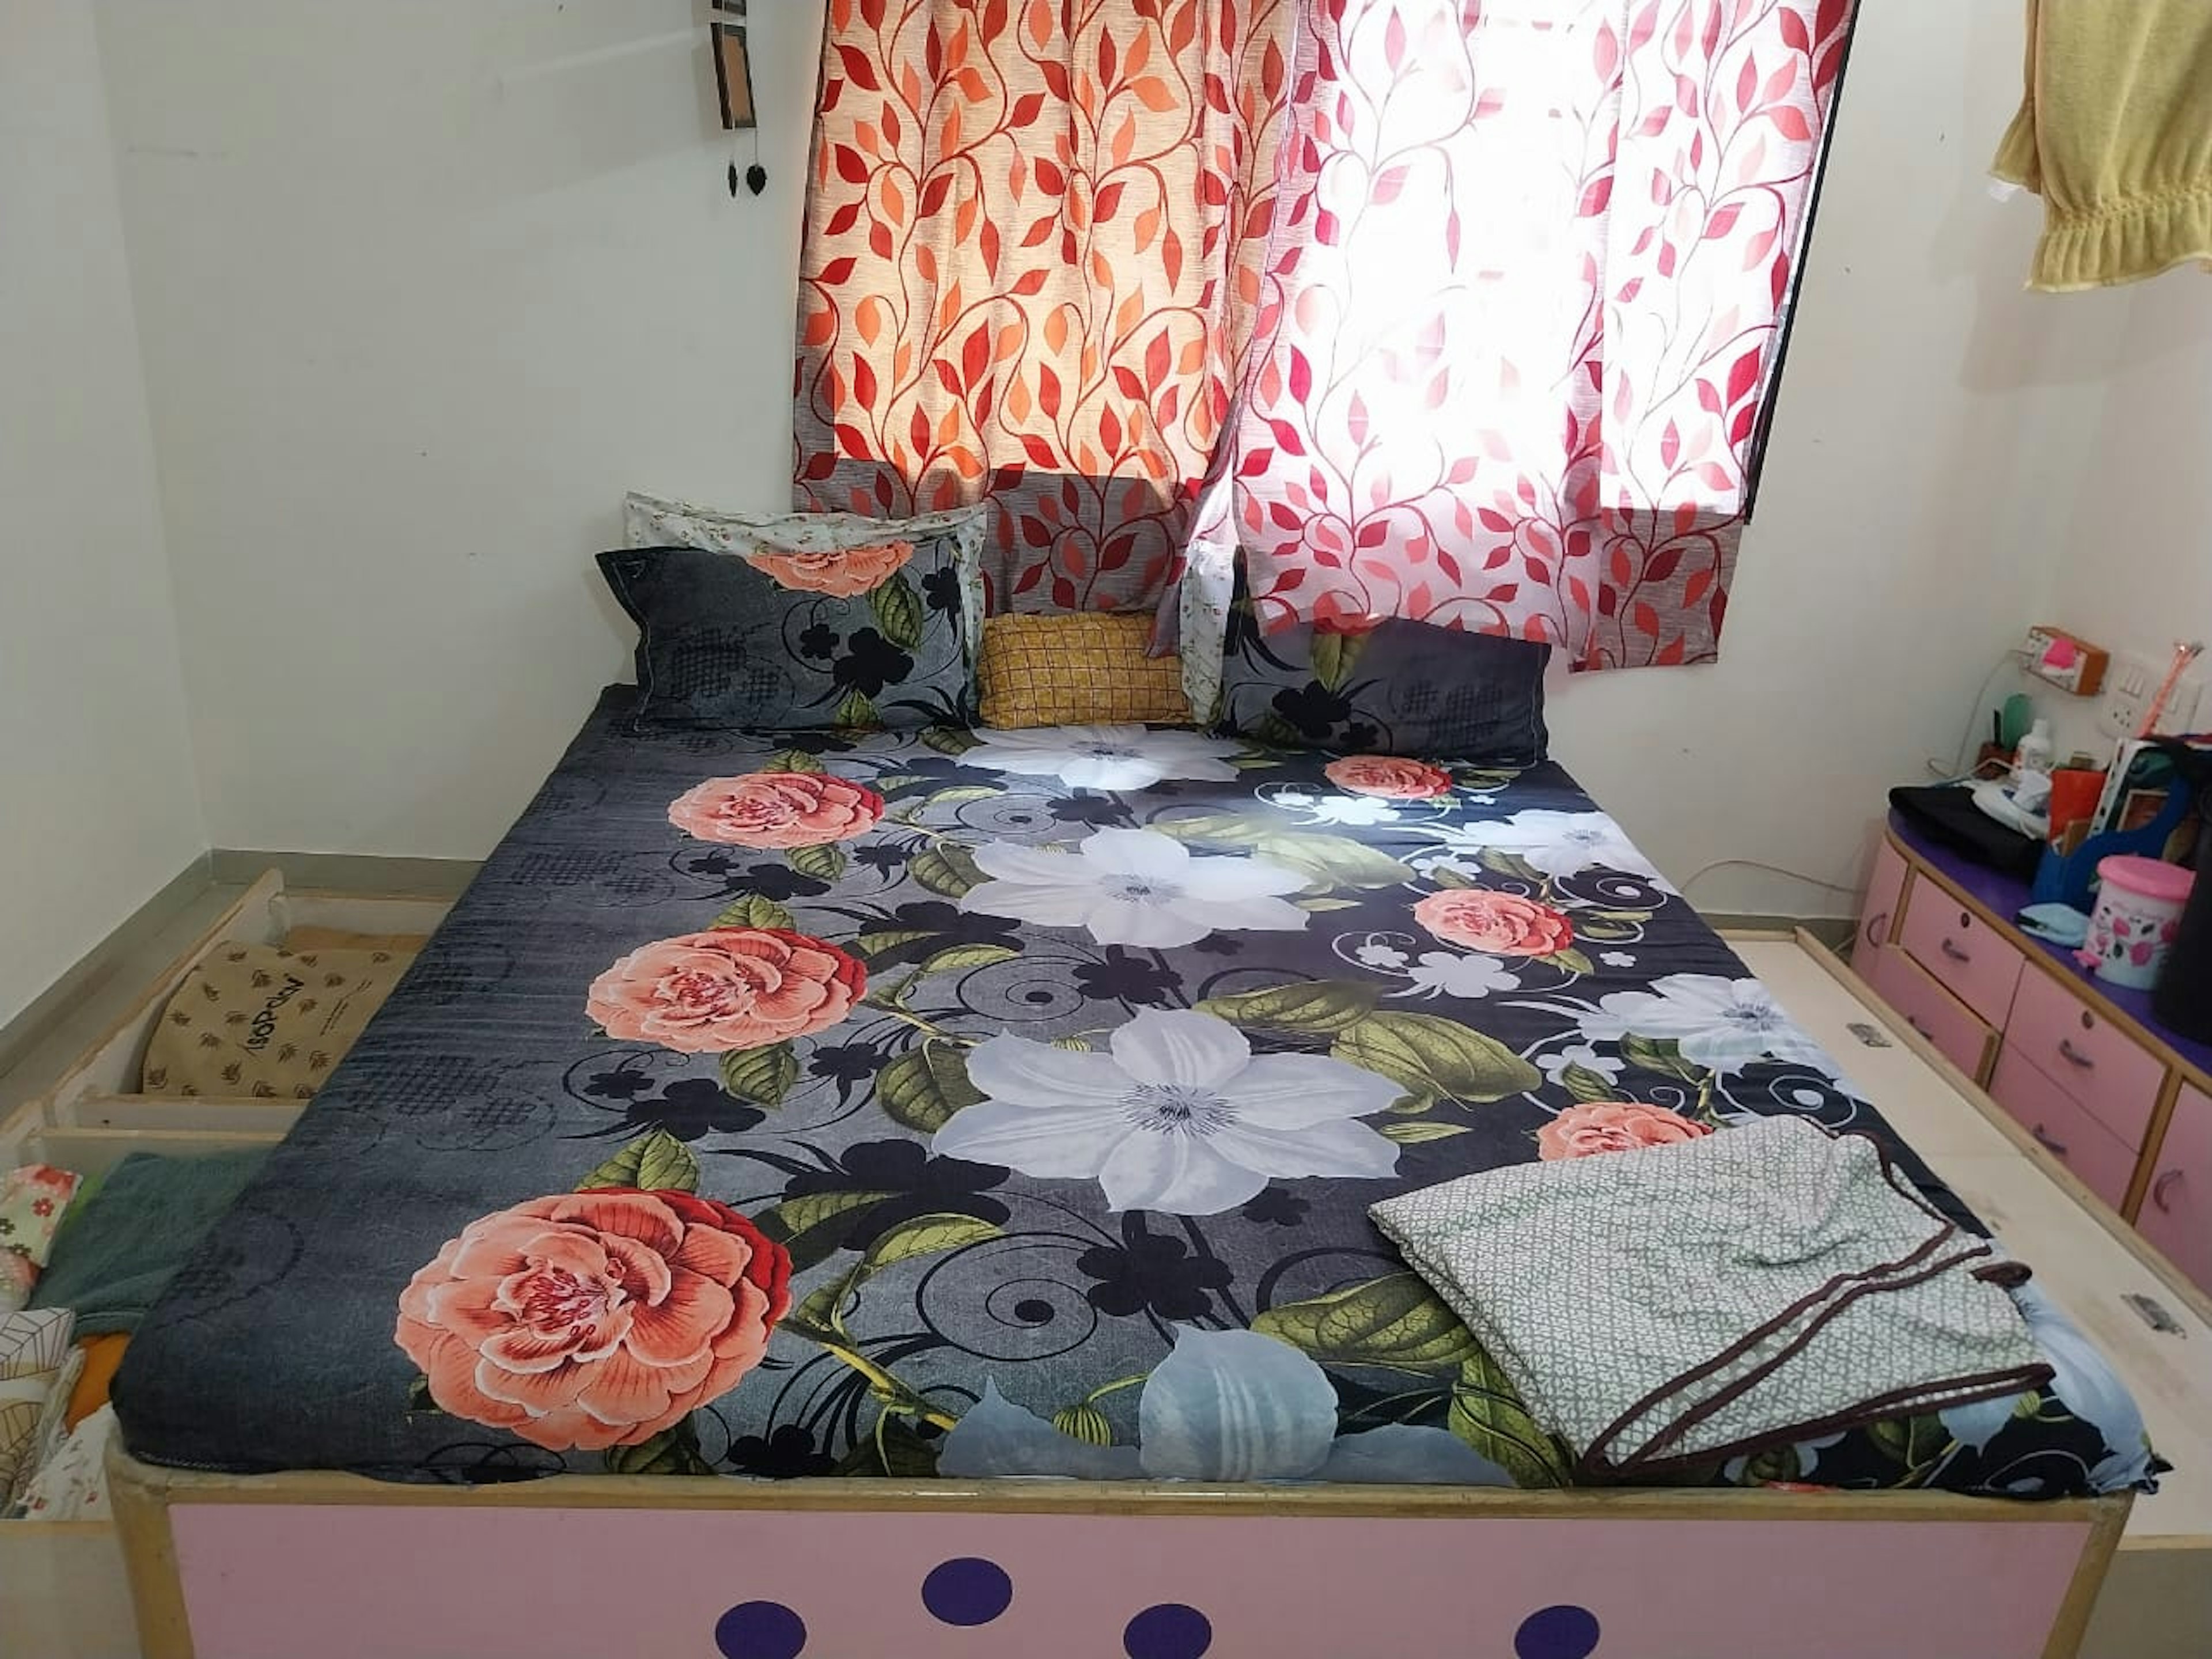 View - Wooden double bed  photos, Wooden double bed  available in Rajkot, make deal in 20000